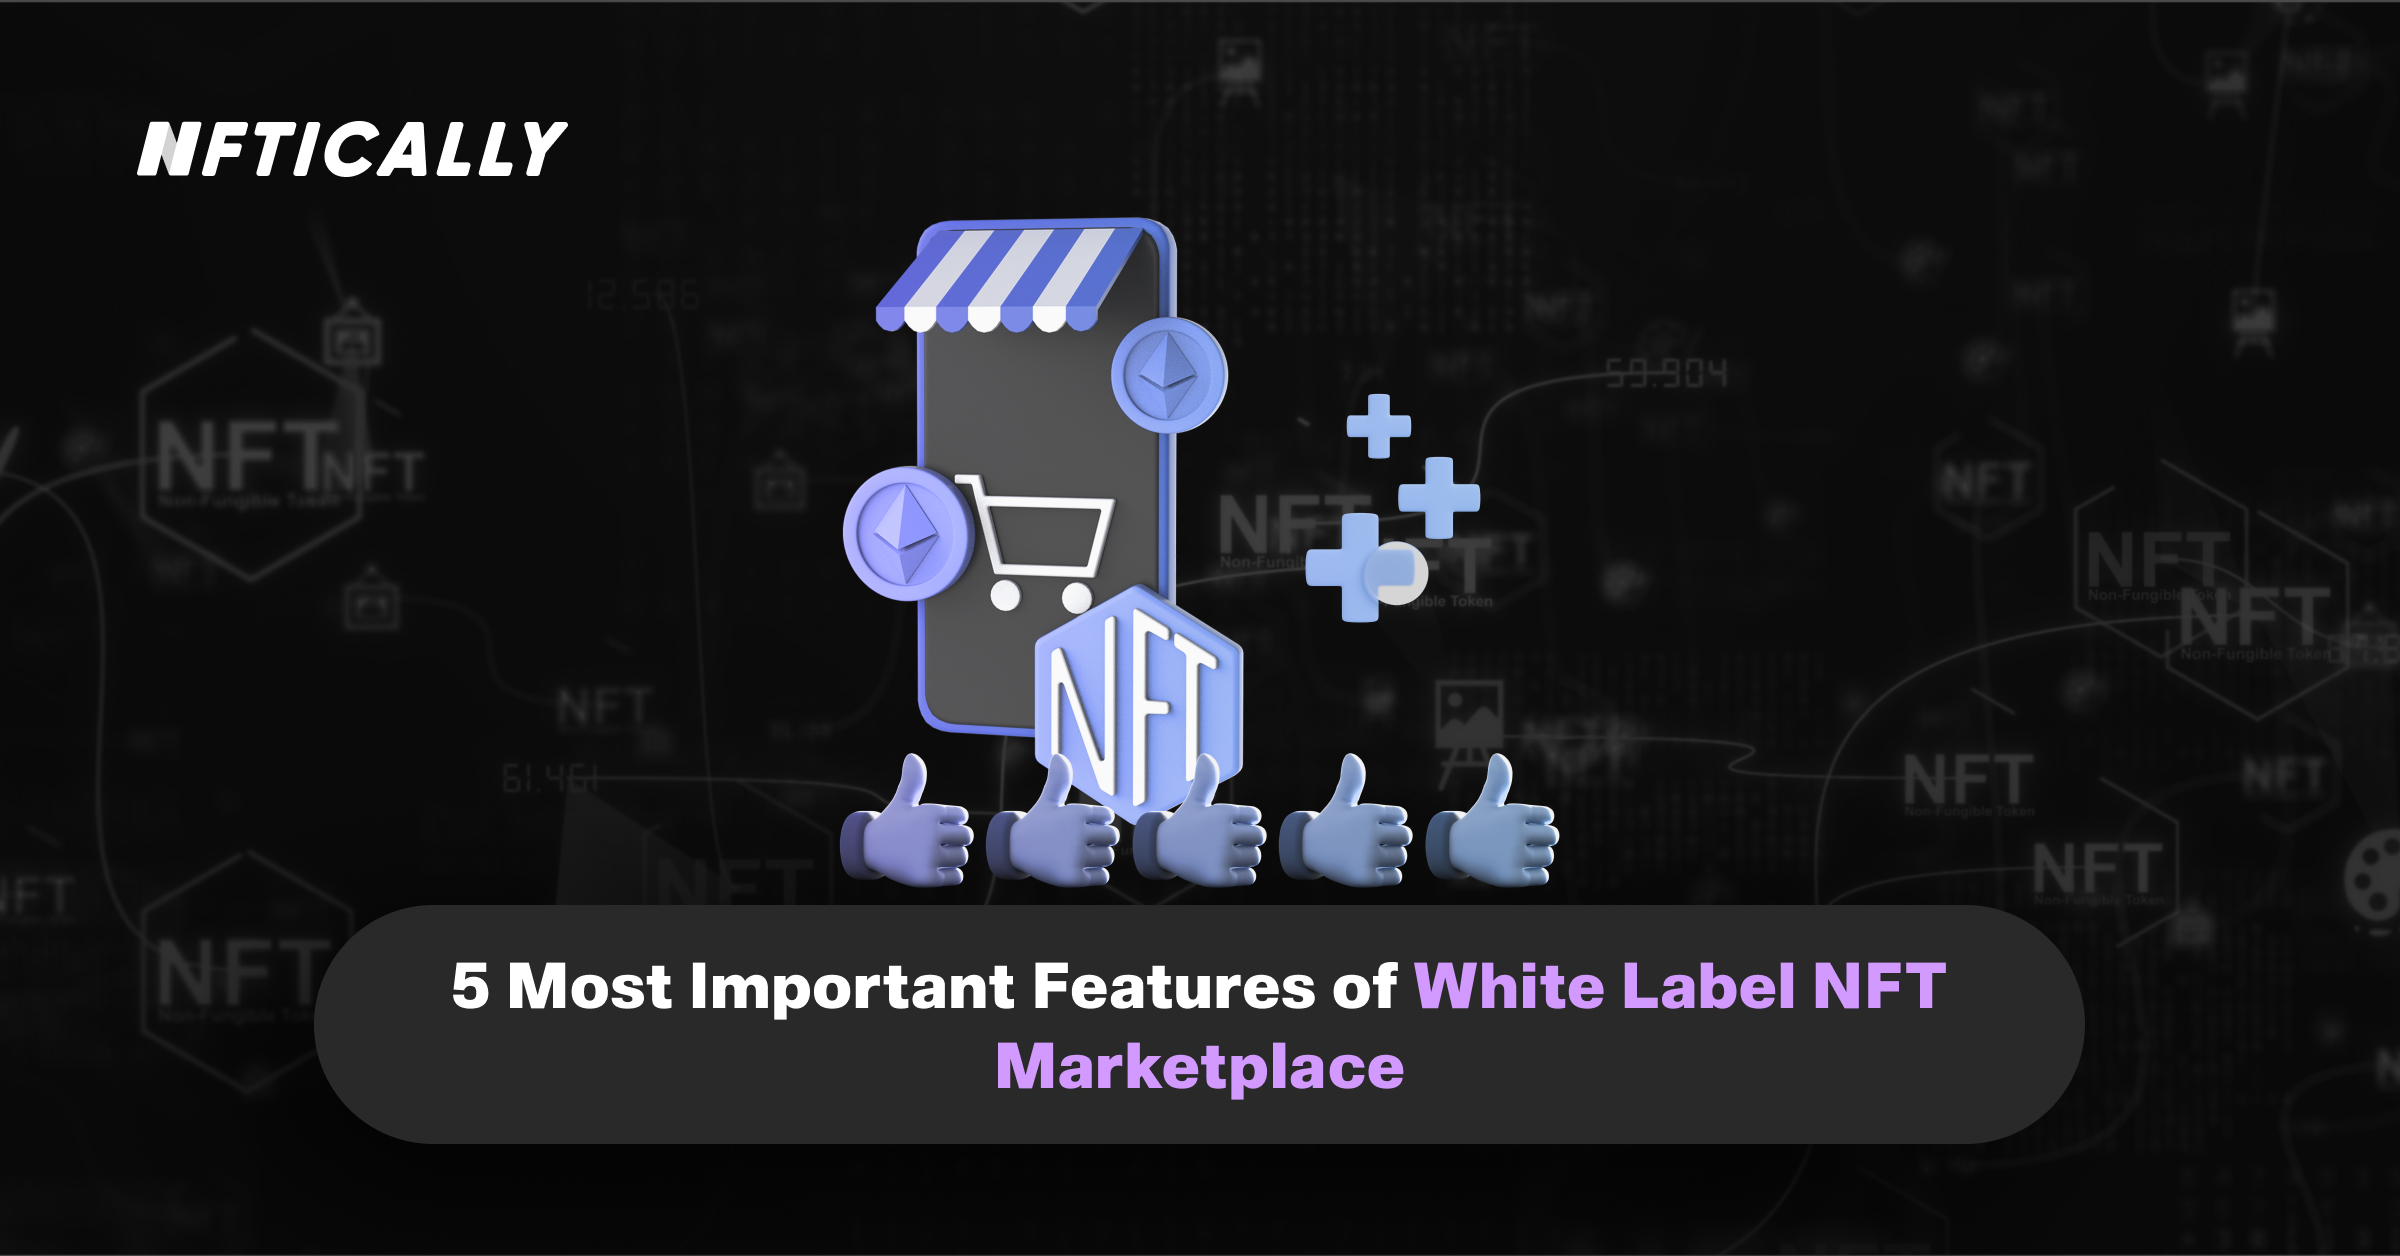 5 Most Important Features of White Label NFT Marketplace